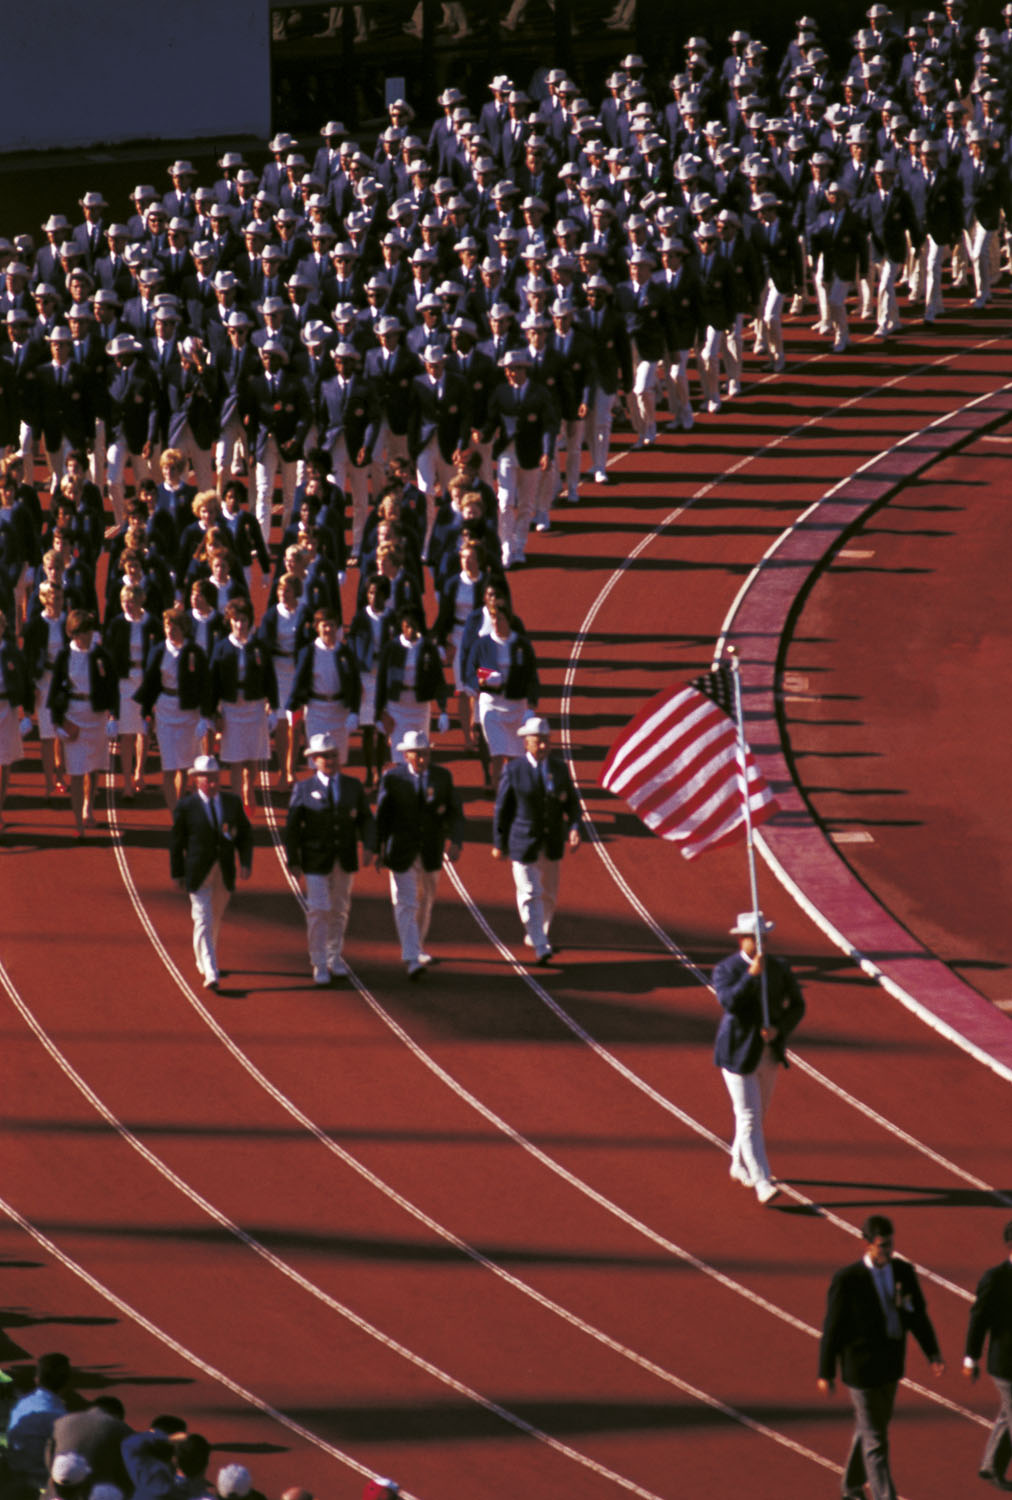 Track and Field athlete William Parry O'Brien, leads the U.S. athletes during the opening ceremony of the Summer Olympics in Tokyo on Oct. 10, 1964.